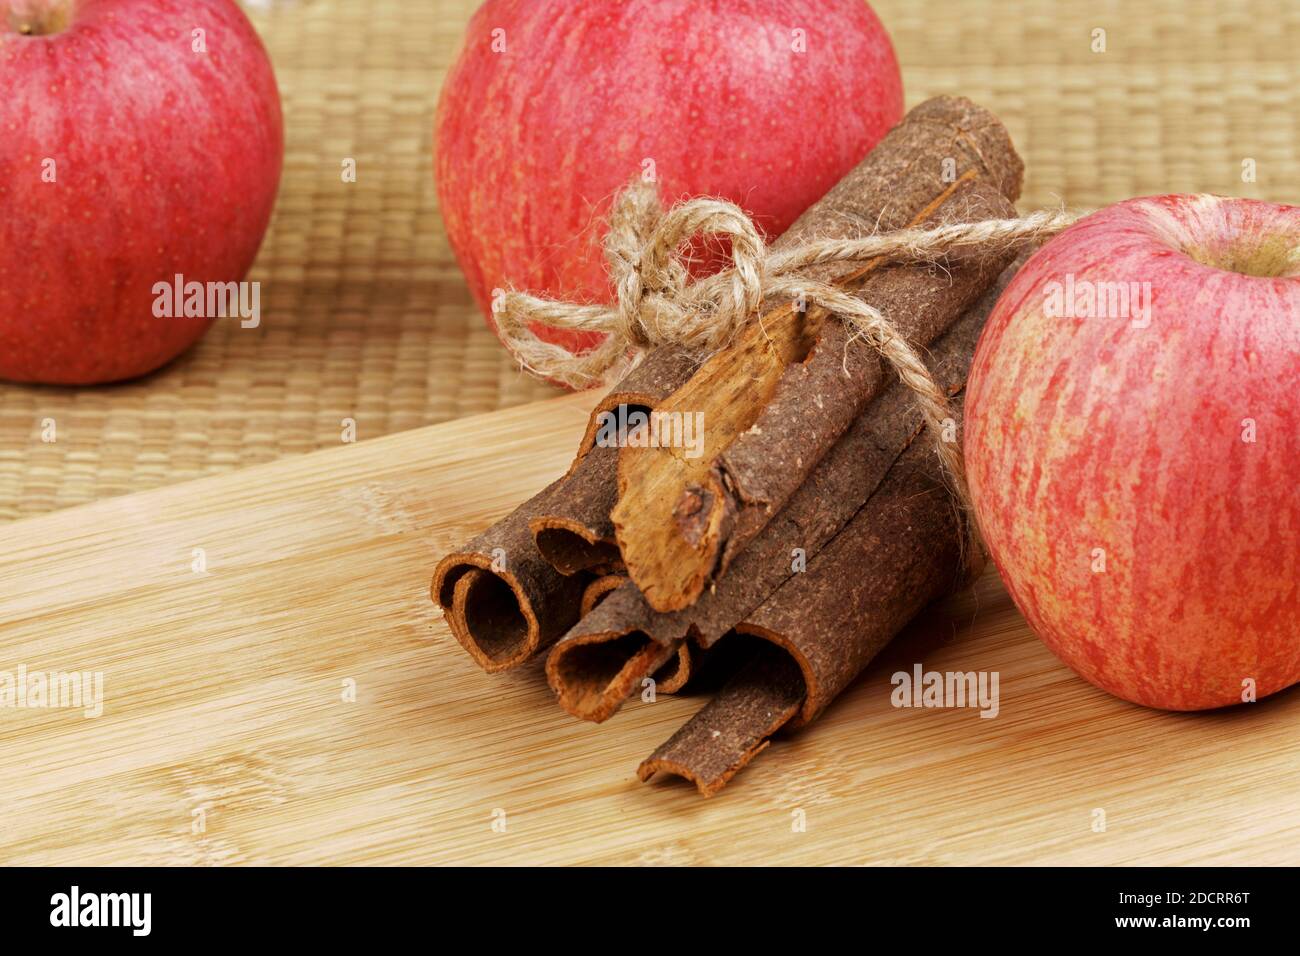 Delicious cinnamon bark and red apples on a wooden background Stock Photo